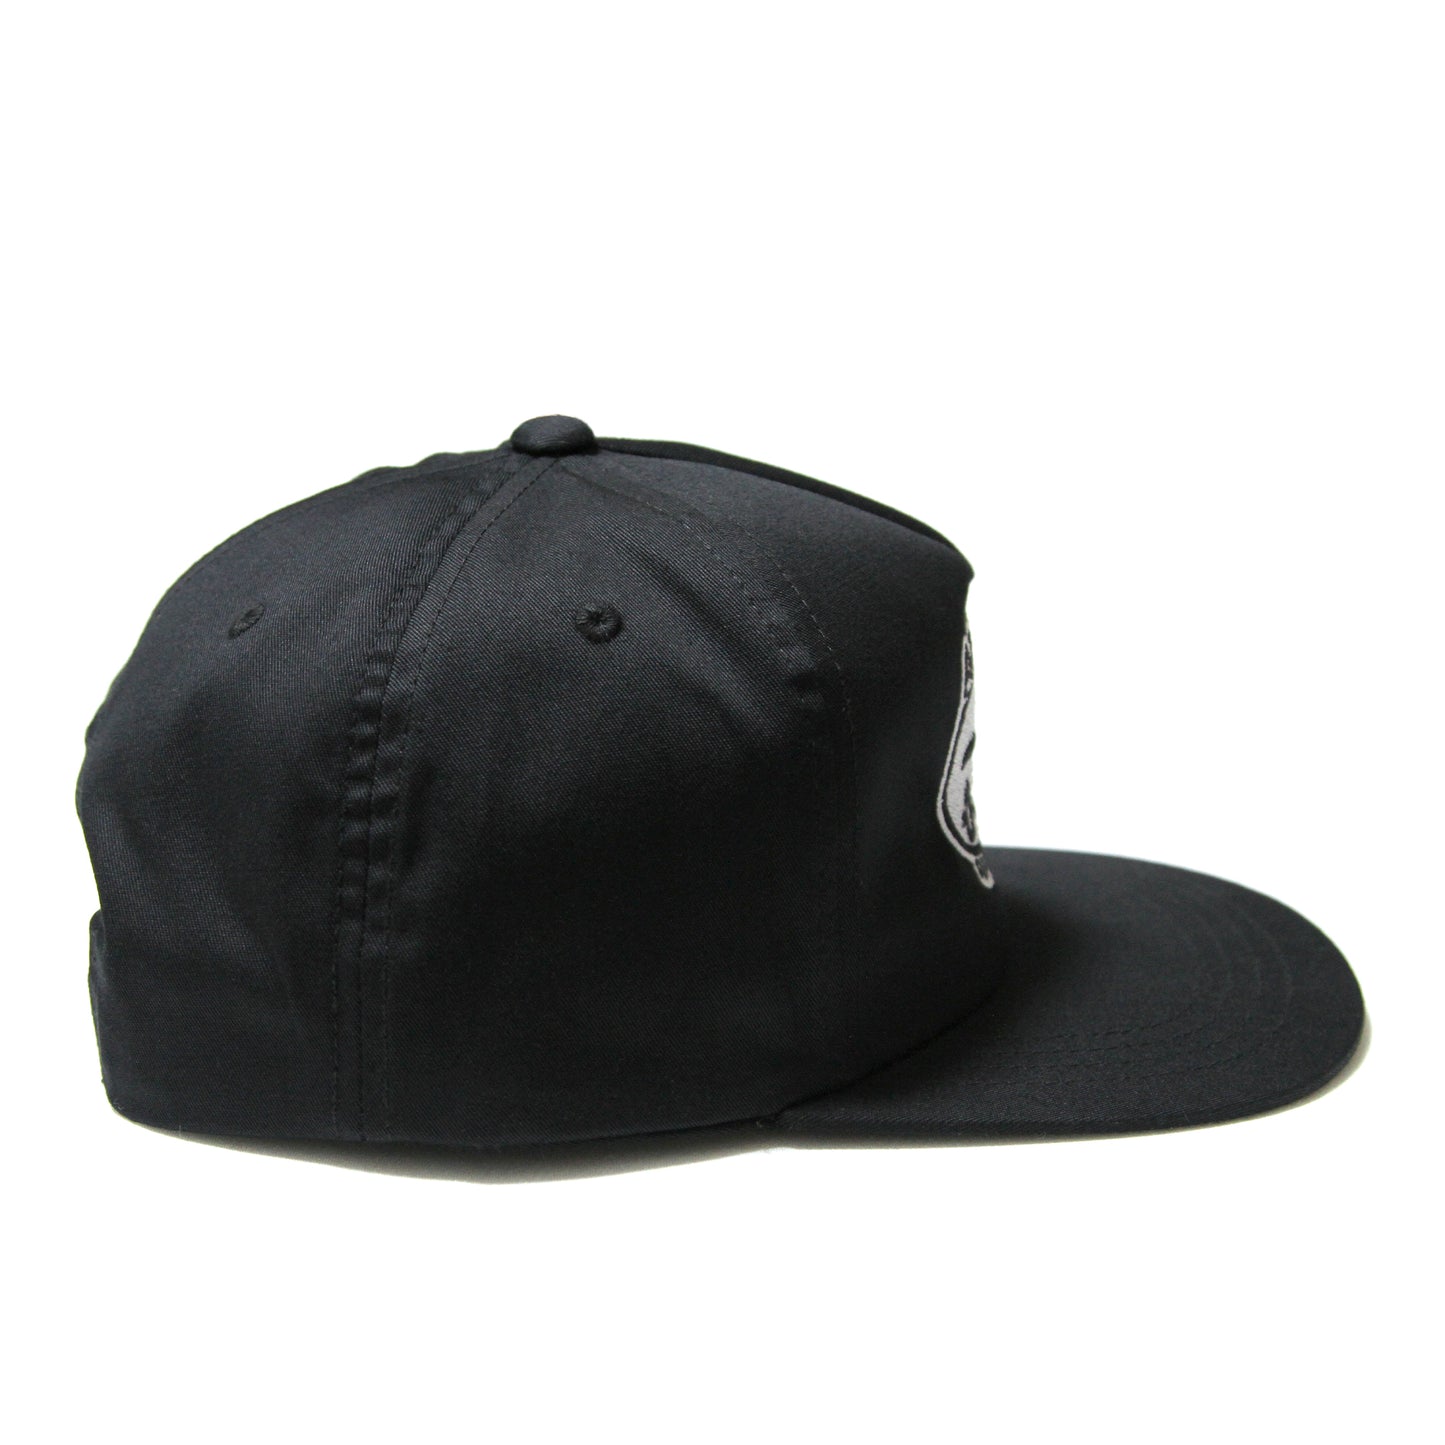 ALYK - Dependable Clothing. Embroidered 5 Panel Cap/Black